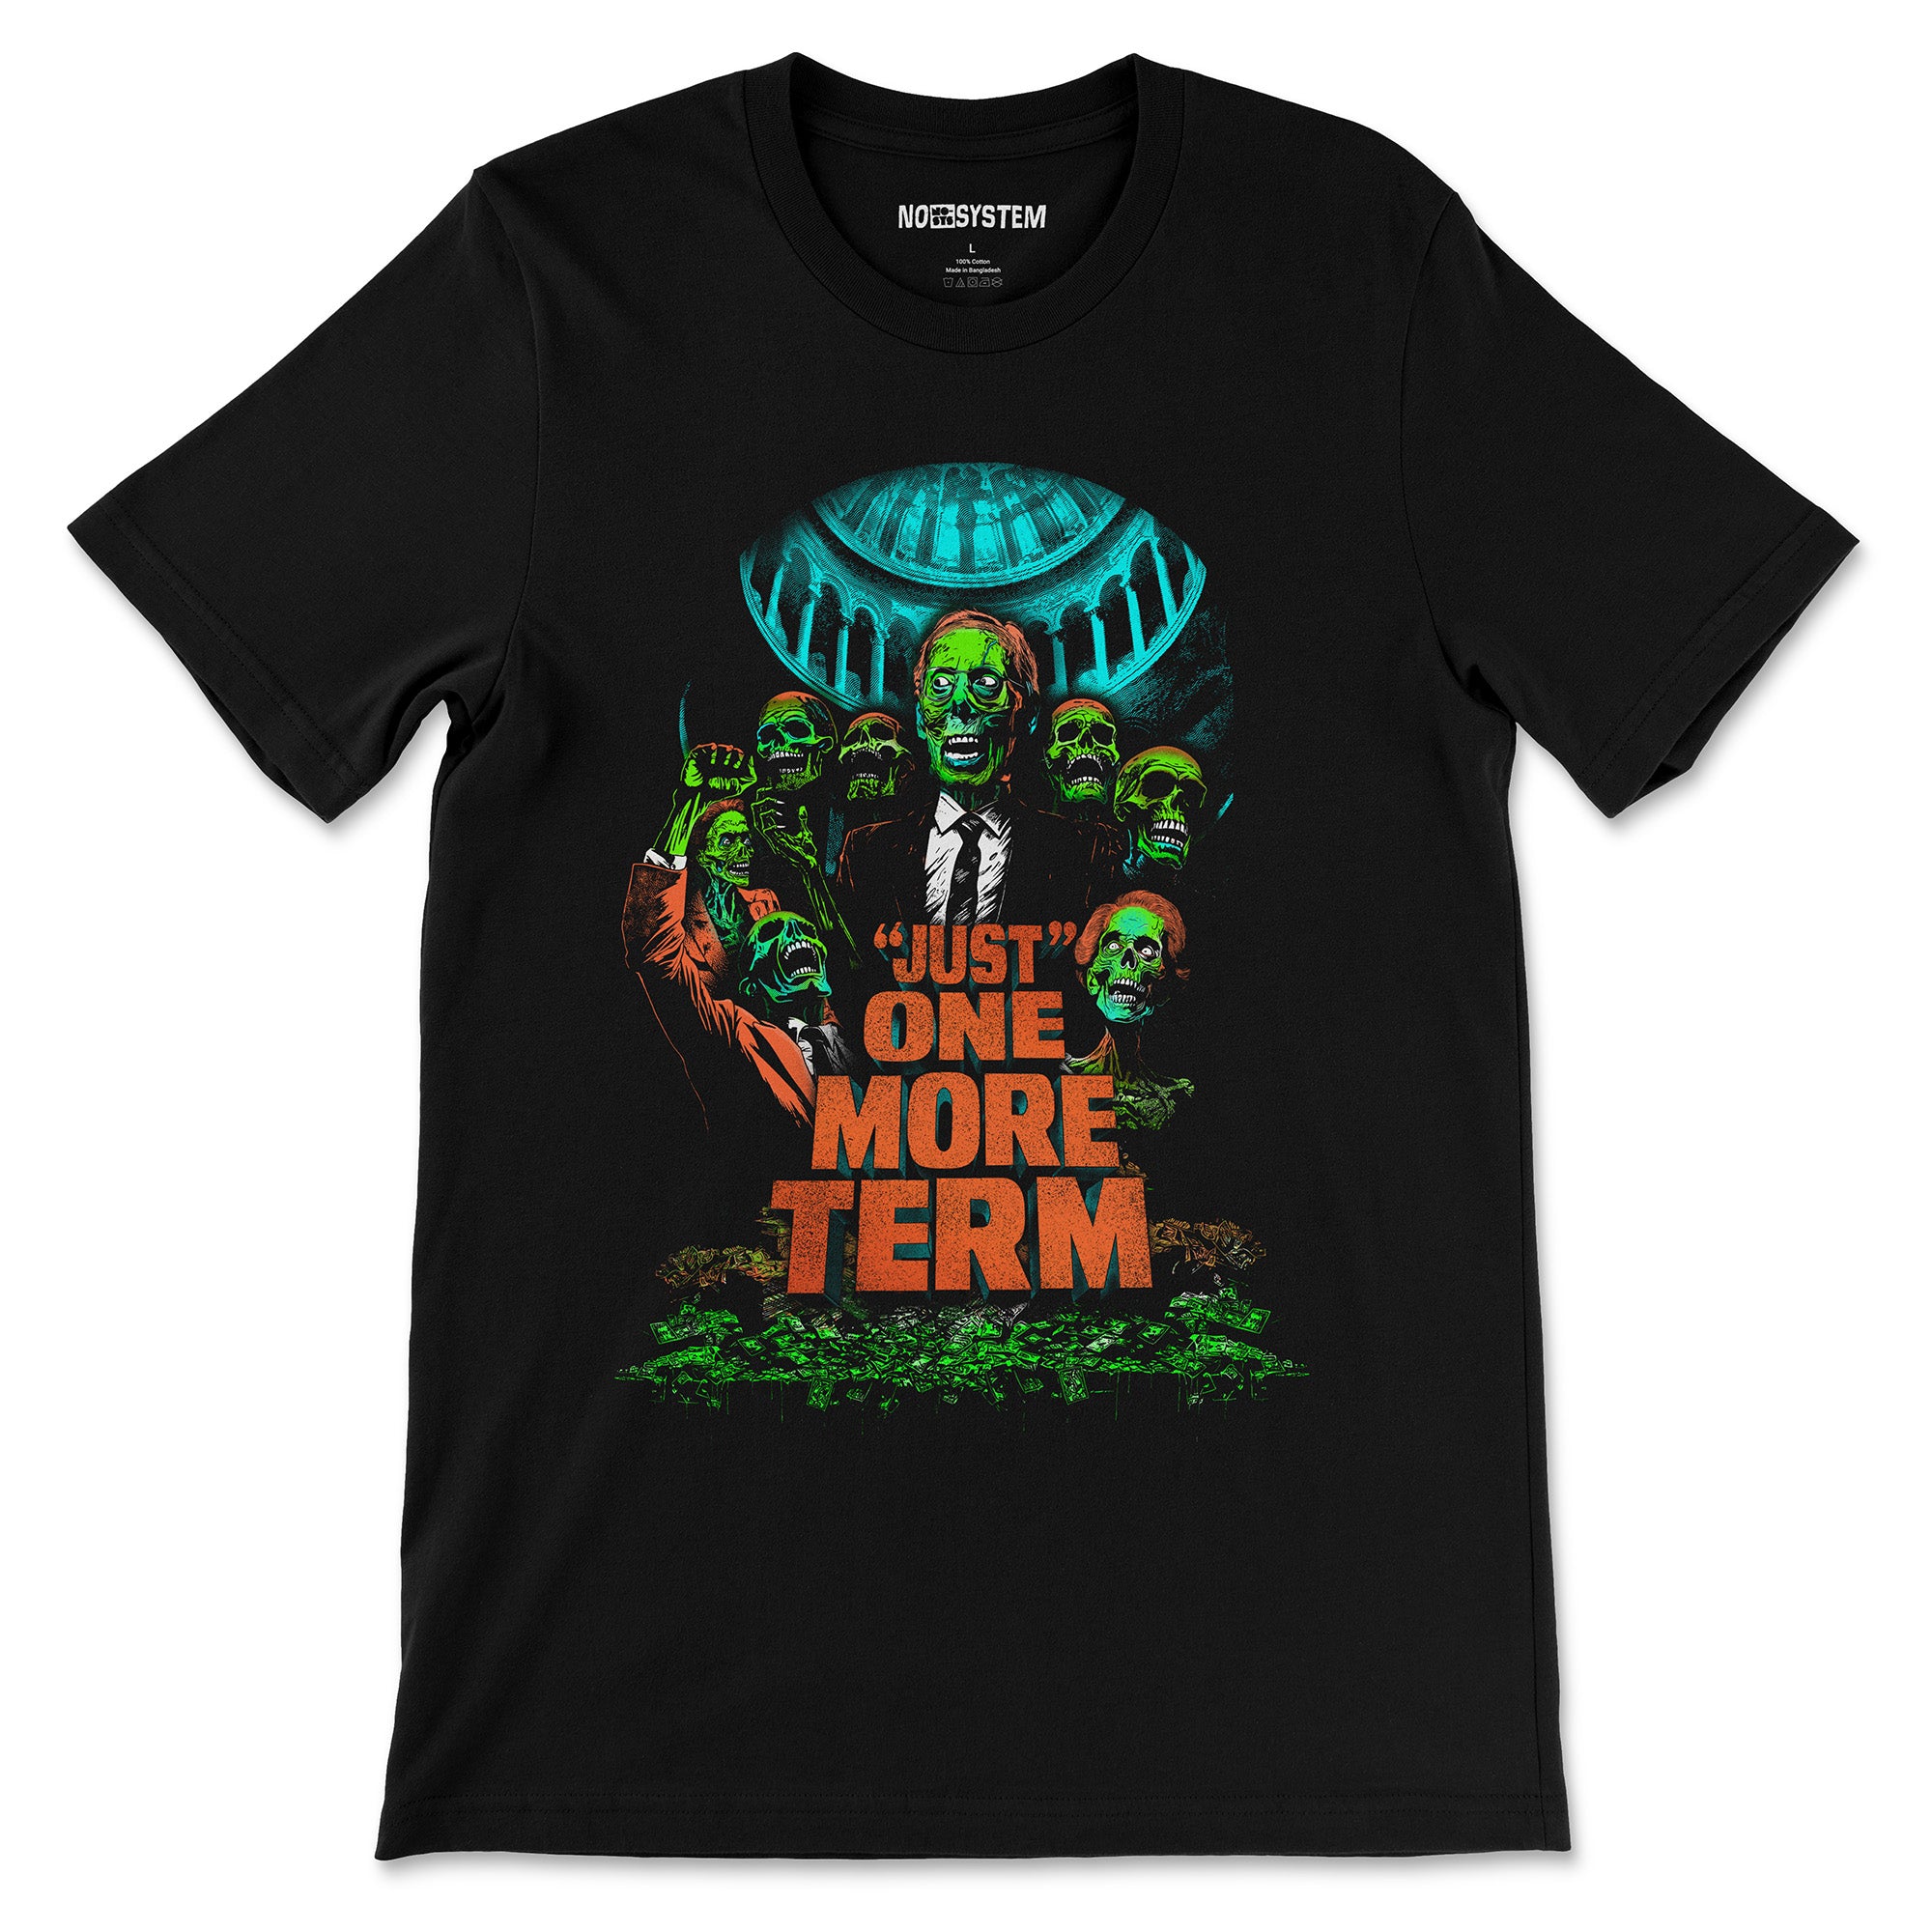 "Just" One More Term Shirt